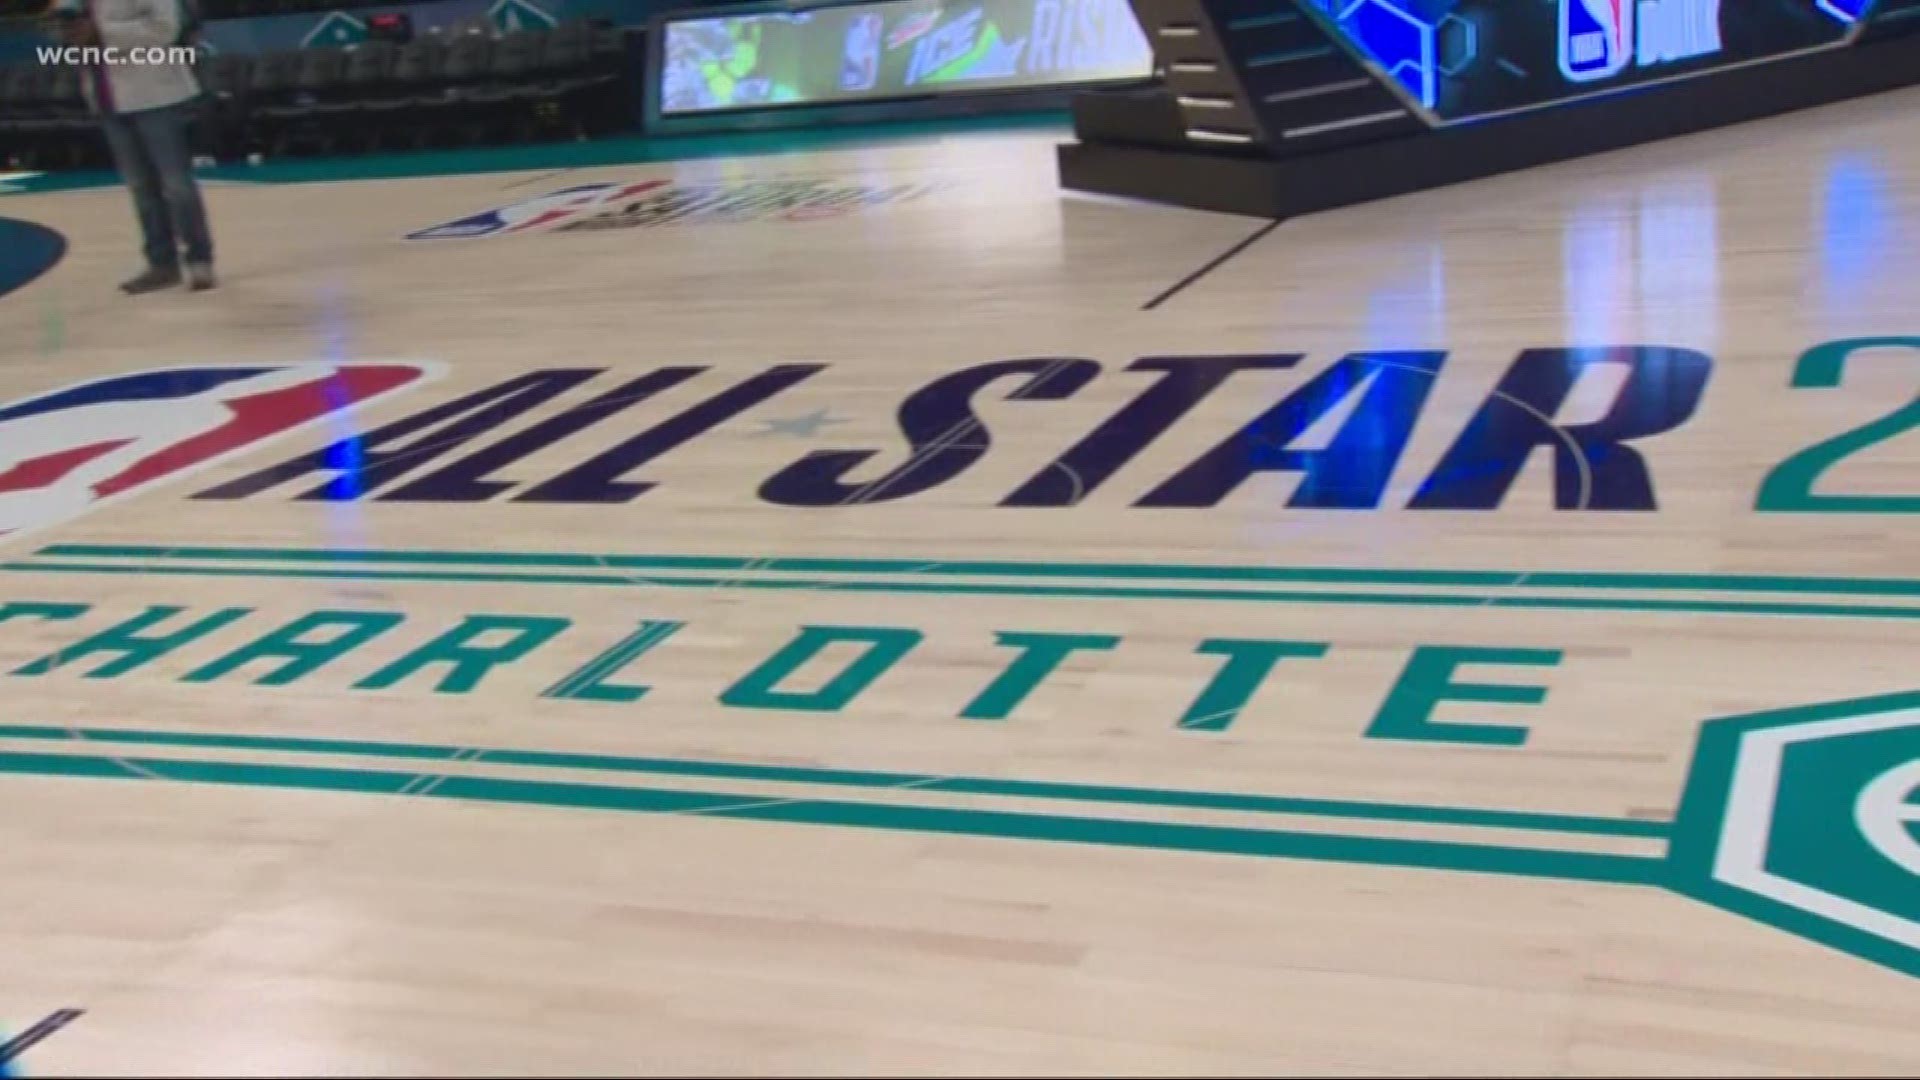 NBA All-Star Weekend has finally arrived in Charlotte. The events get started Friday in uptown with the Celebrity All-Star Game and multiple celebrity parties.